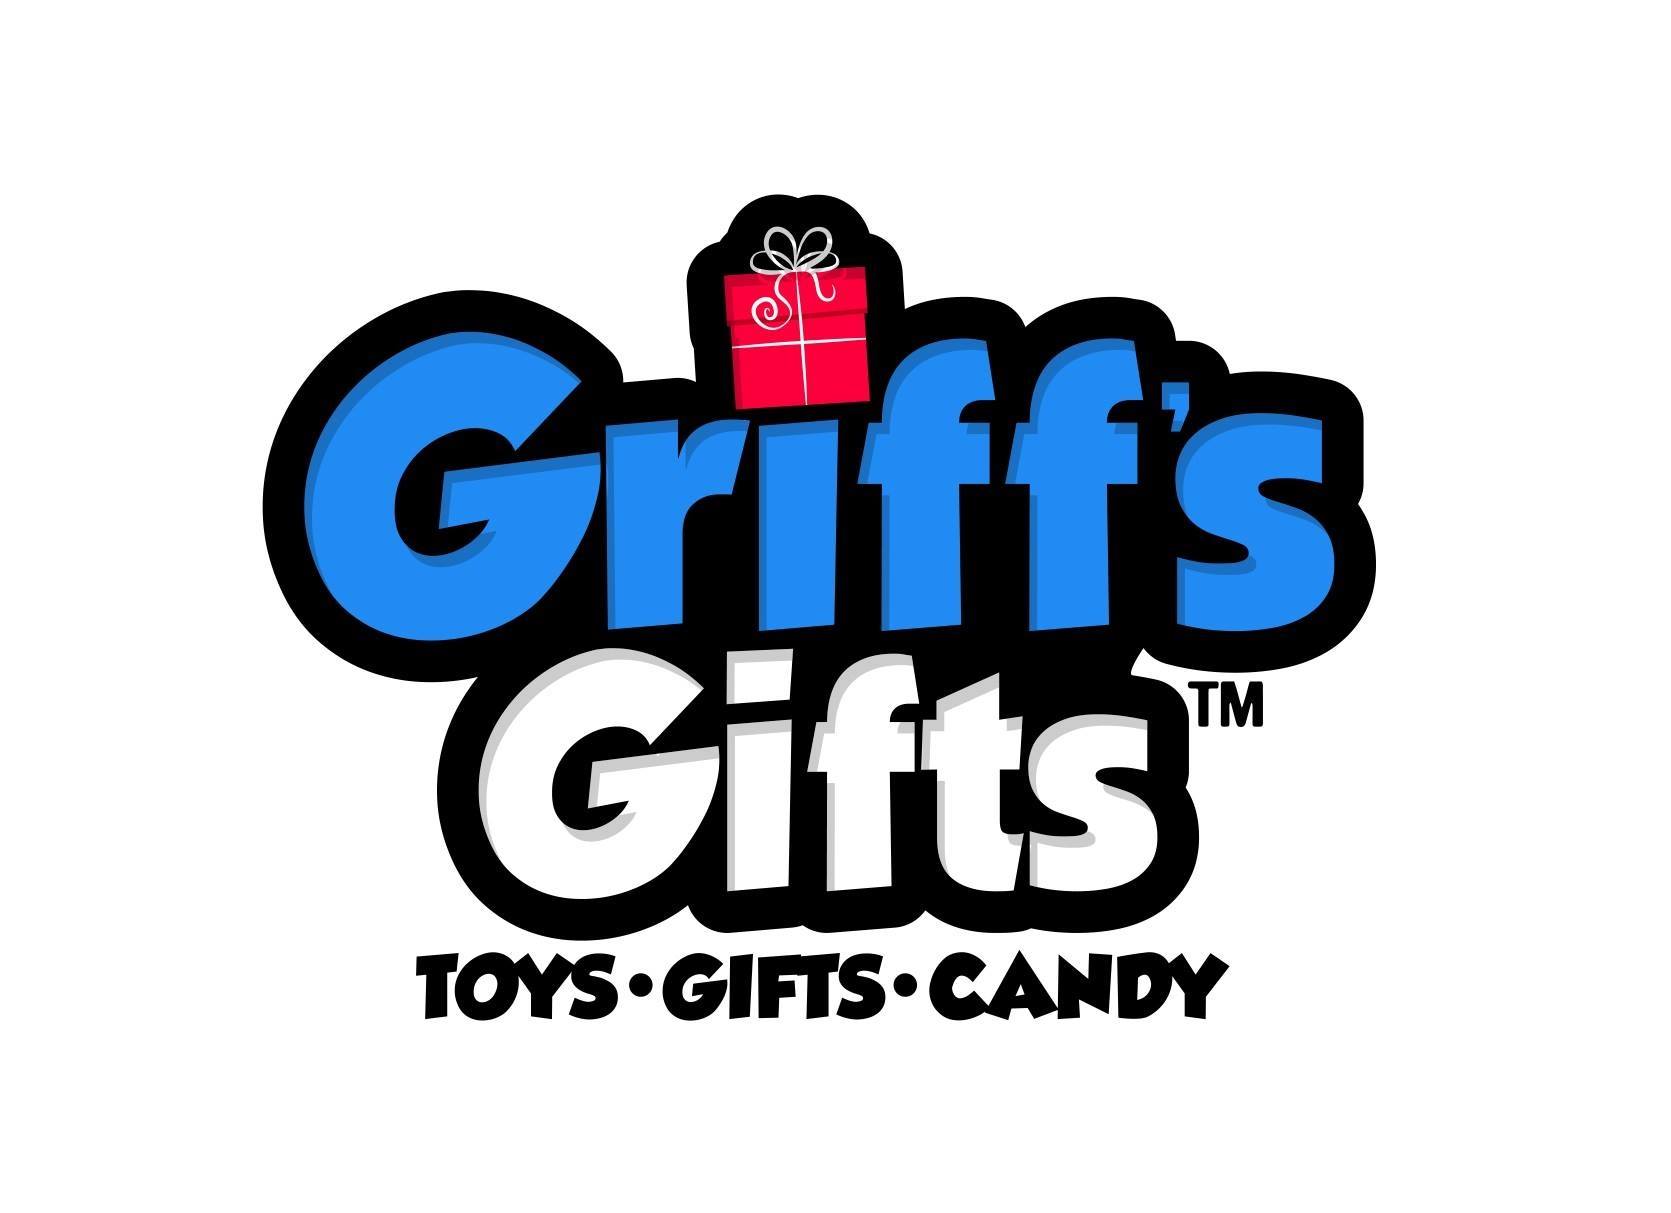 Griff’s Gifts